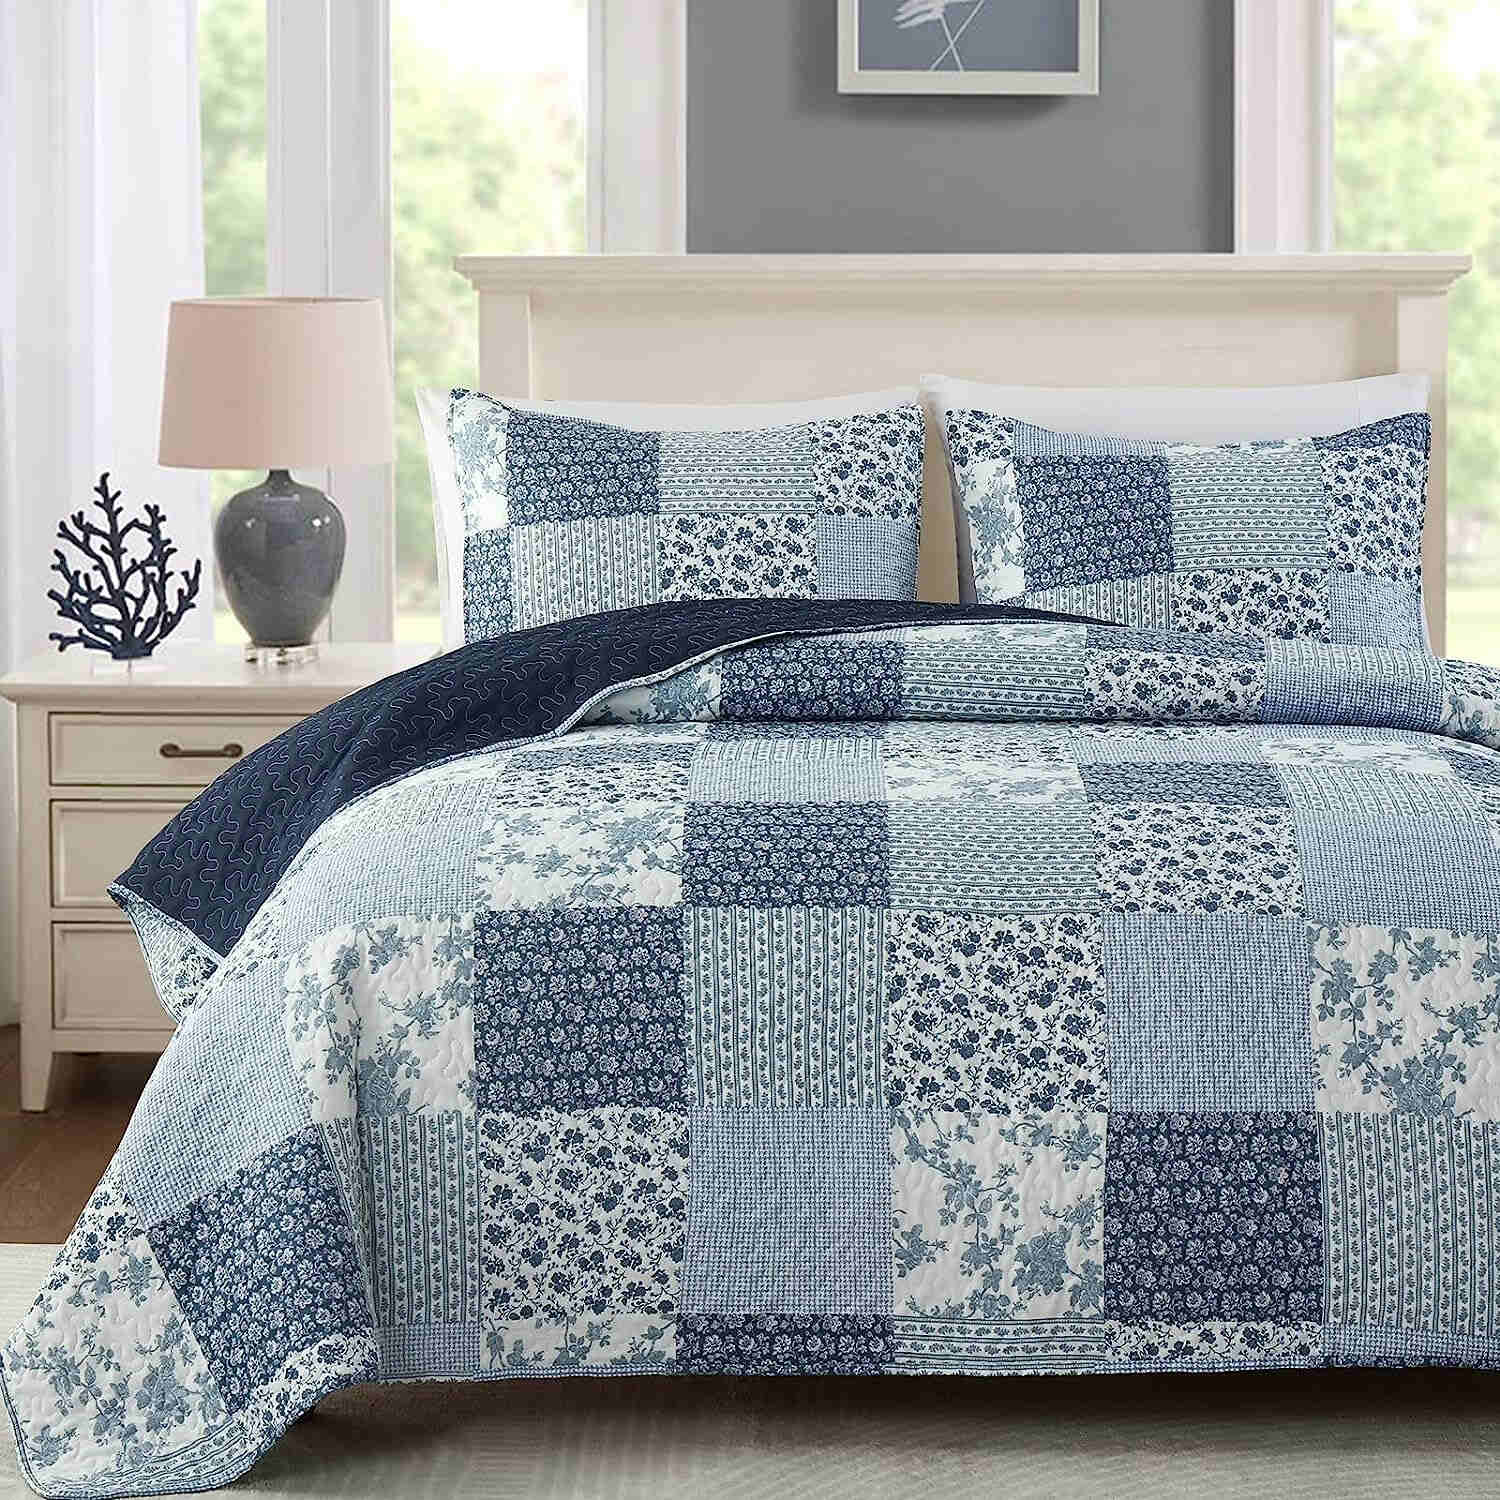 10 Incredible Quilt Sets Queen For 2023 1698624499 